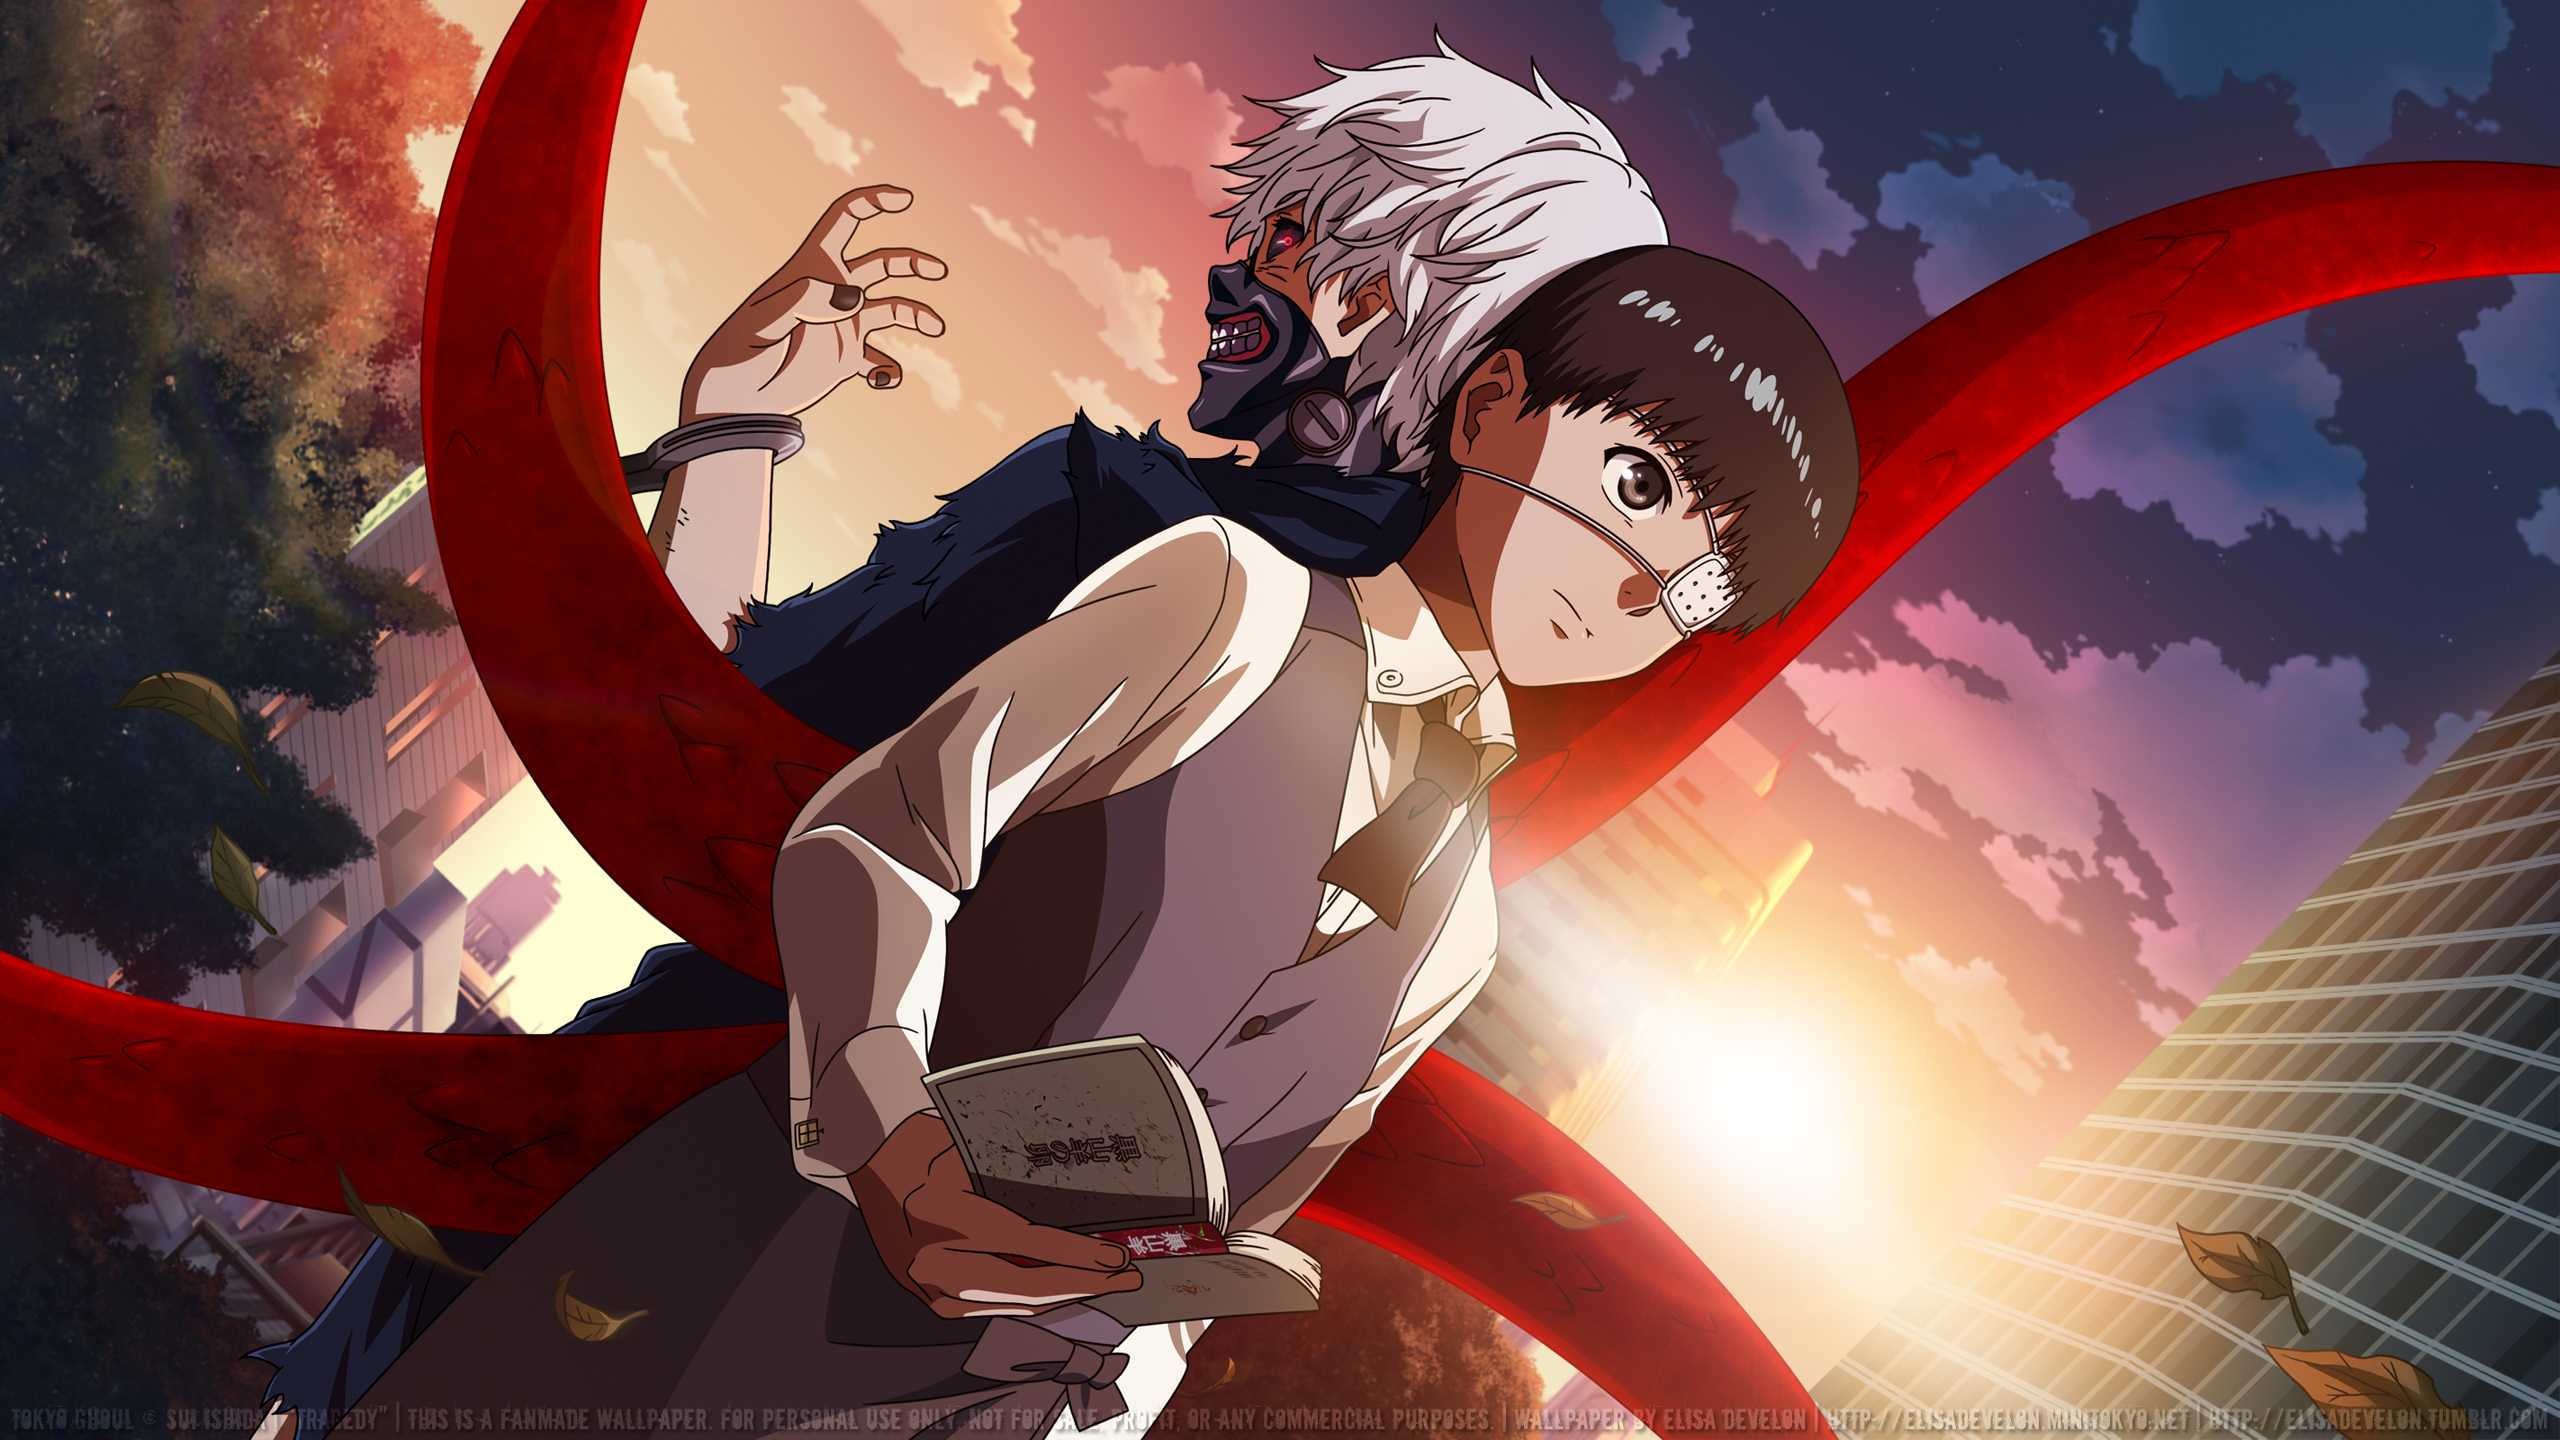 Tokyo Ghoul Wallpaper HD Collection Of Tokyo Ghoul Anime